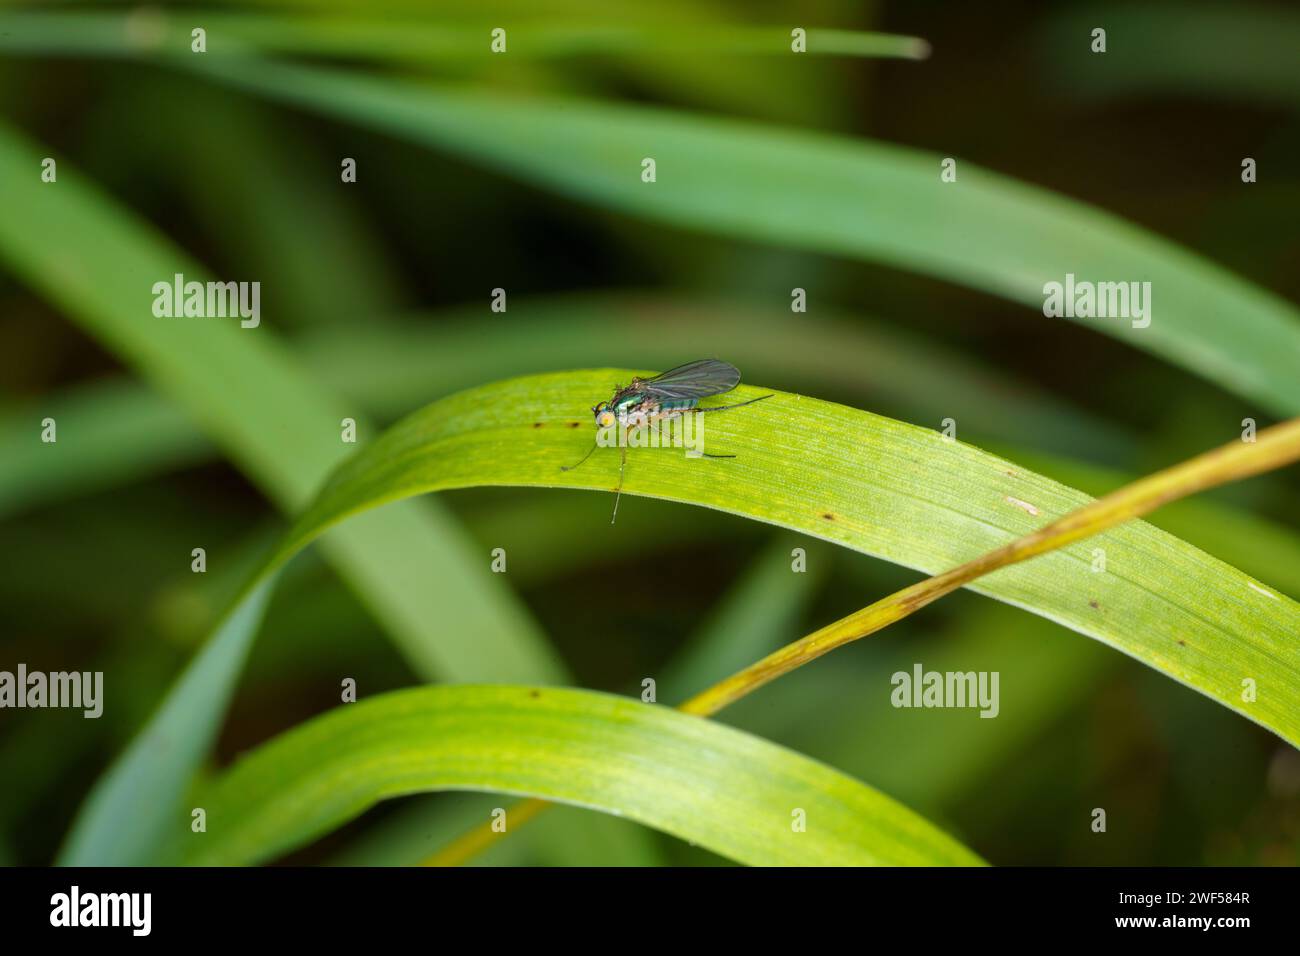 Family Dolichopodidae Long-legged fly wild nature insect wallpaper, picture, photography Stock Photo